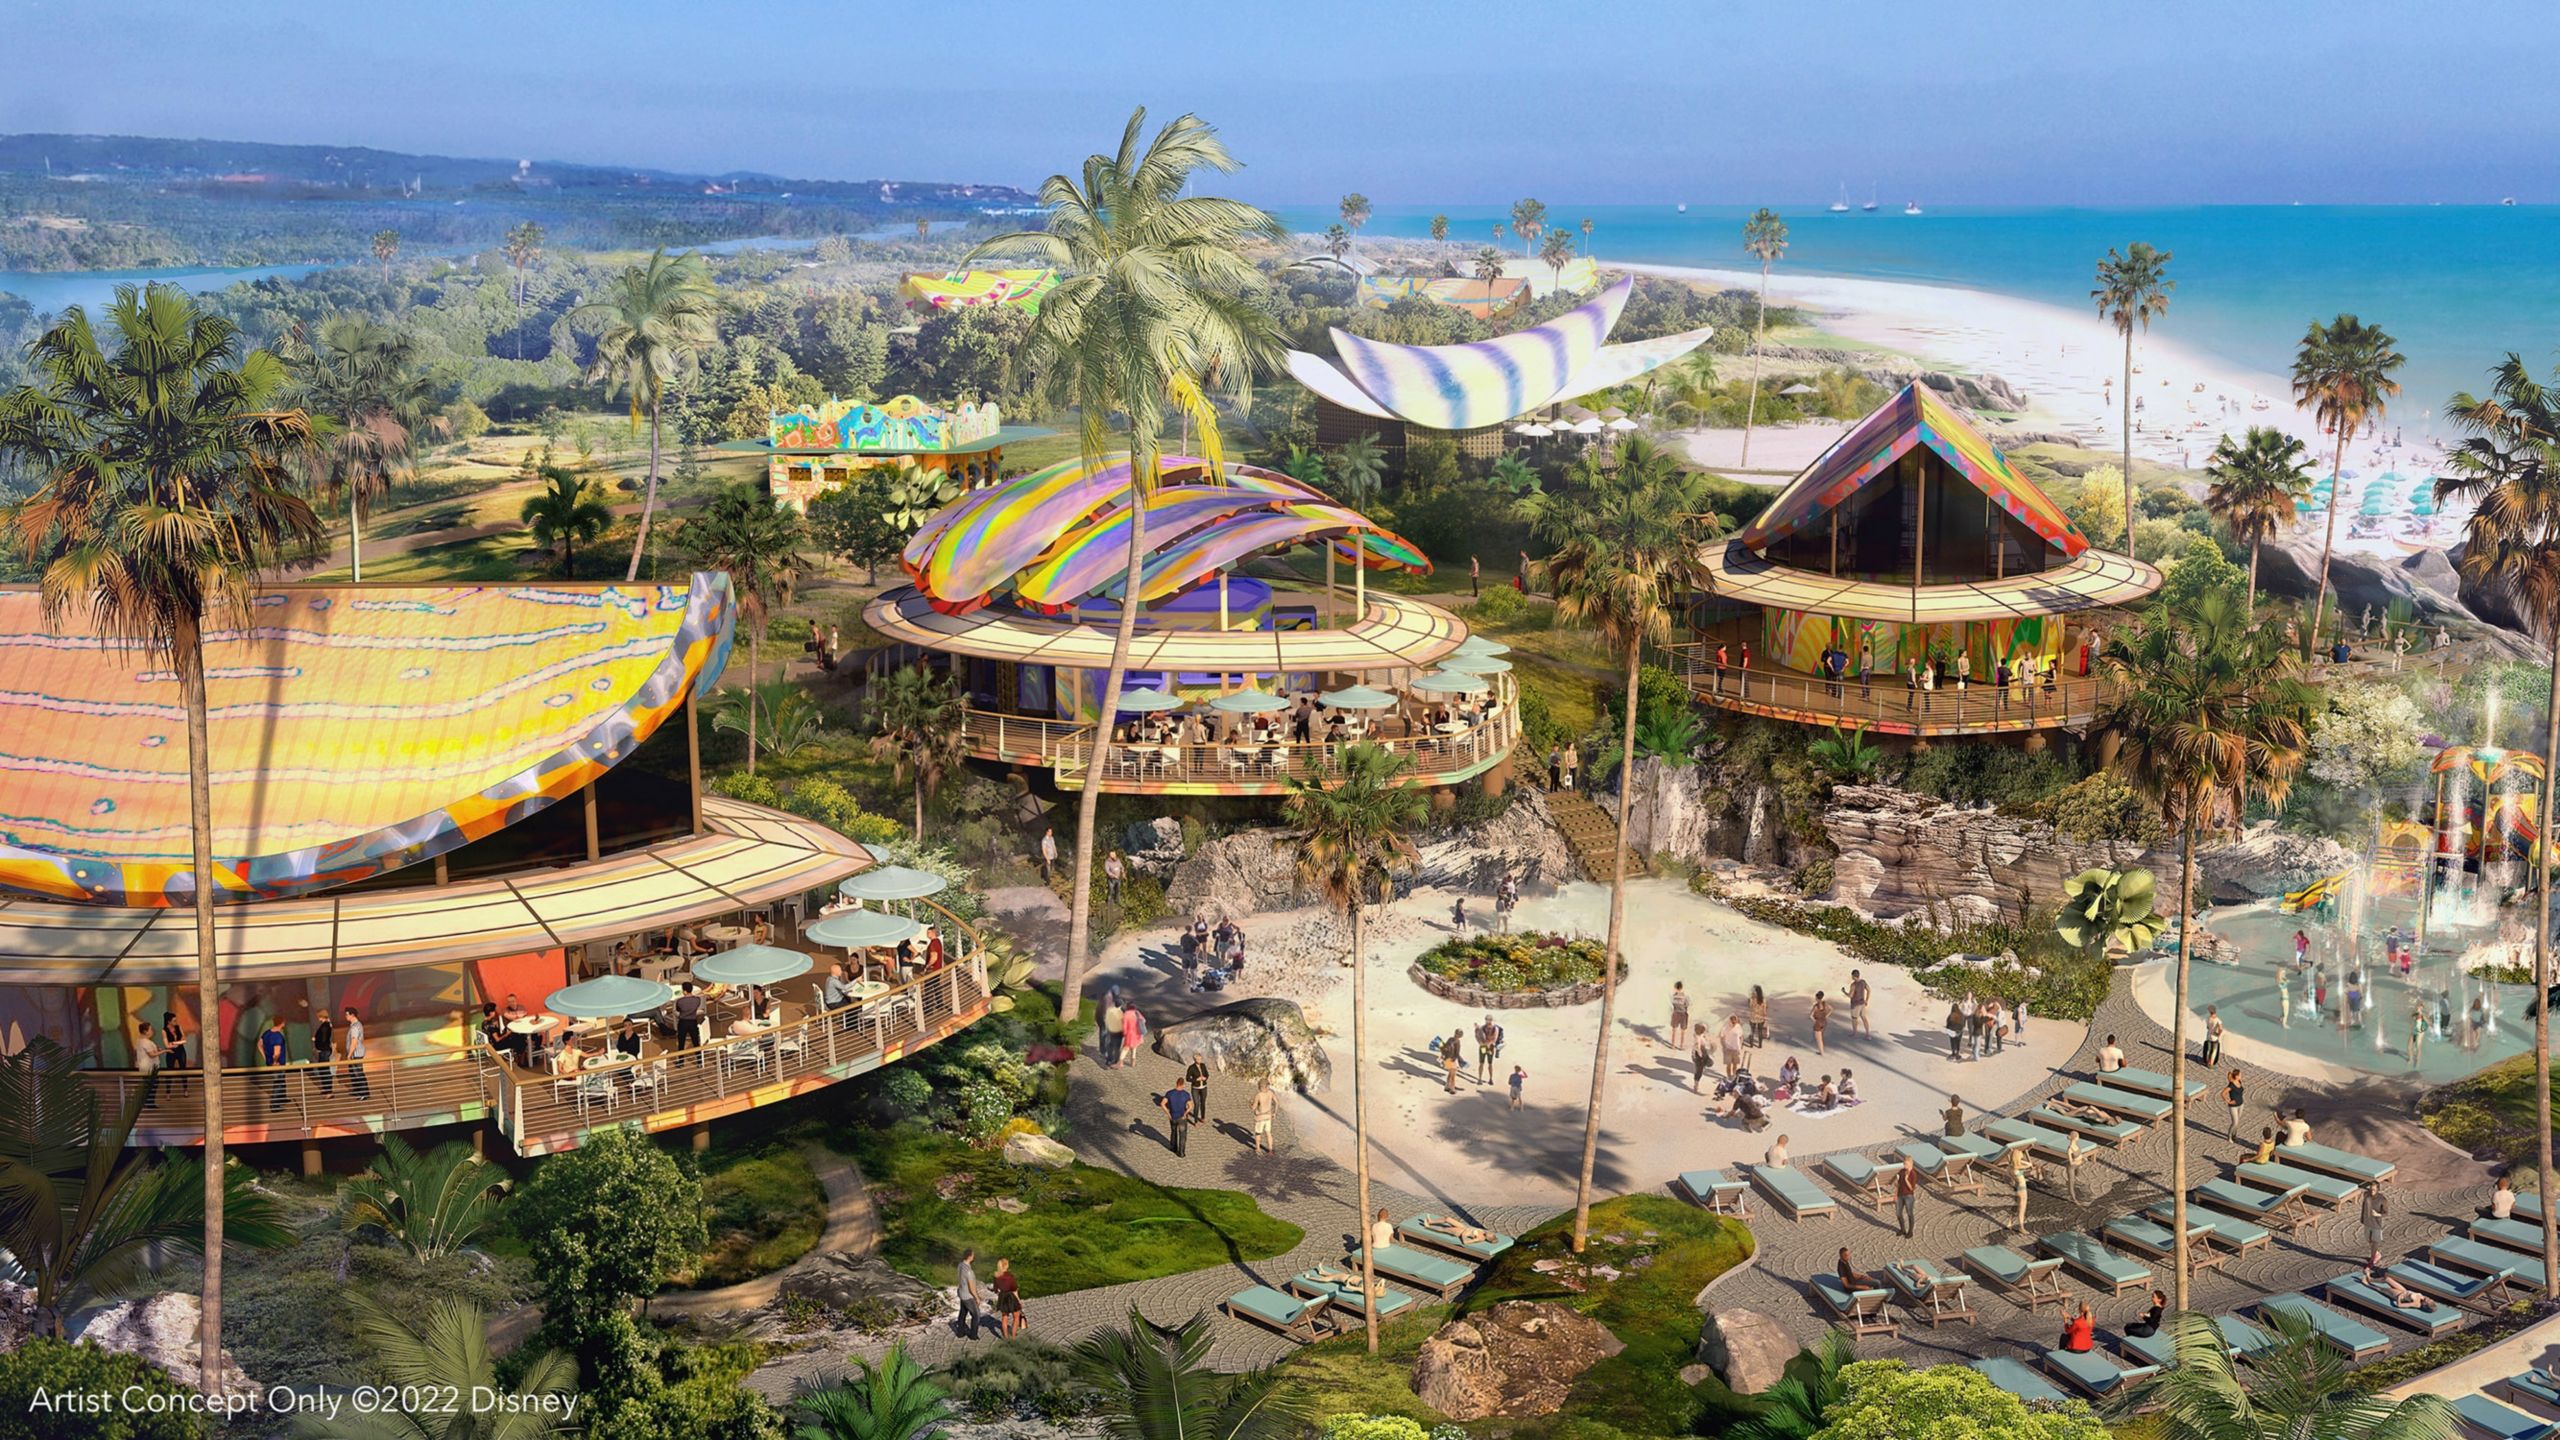 A tropical beach setting with splashing fountains, dining and recreational spaces, and several pavilions